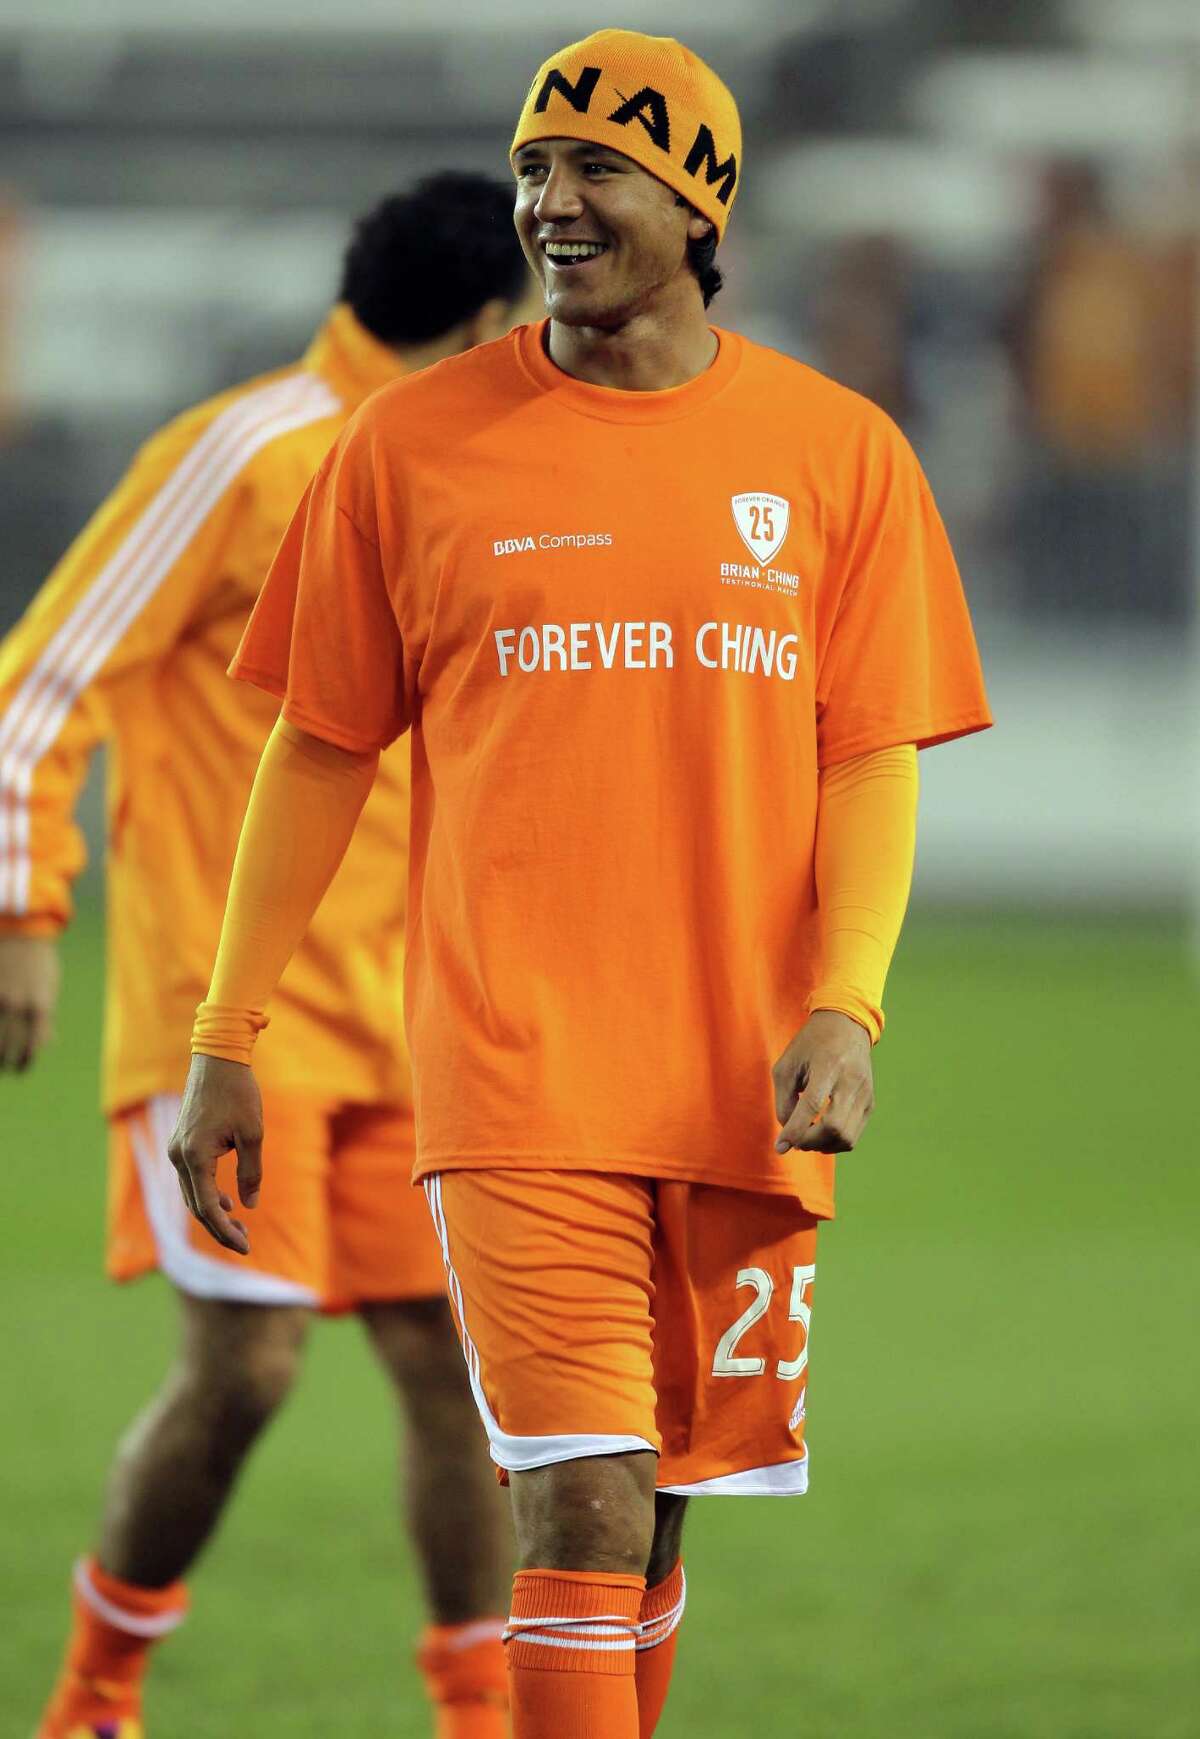 Brian Ching smiles during warmups before the Brian Ching Testimonial match, Friday, December 13, 2013, at BBVA Compass Stadium in Houston.